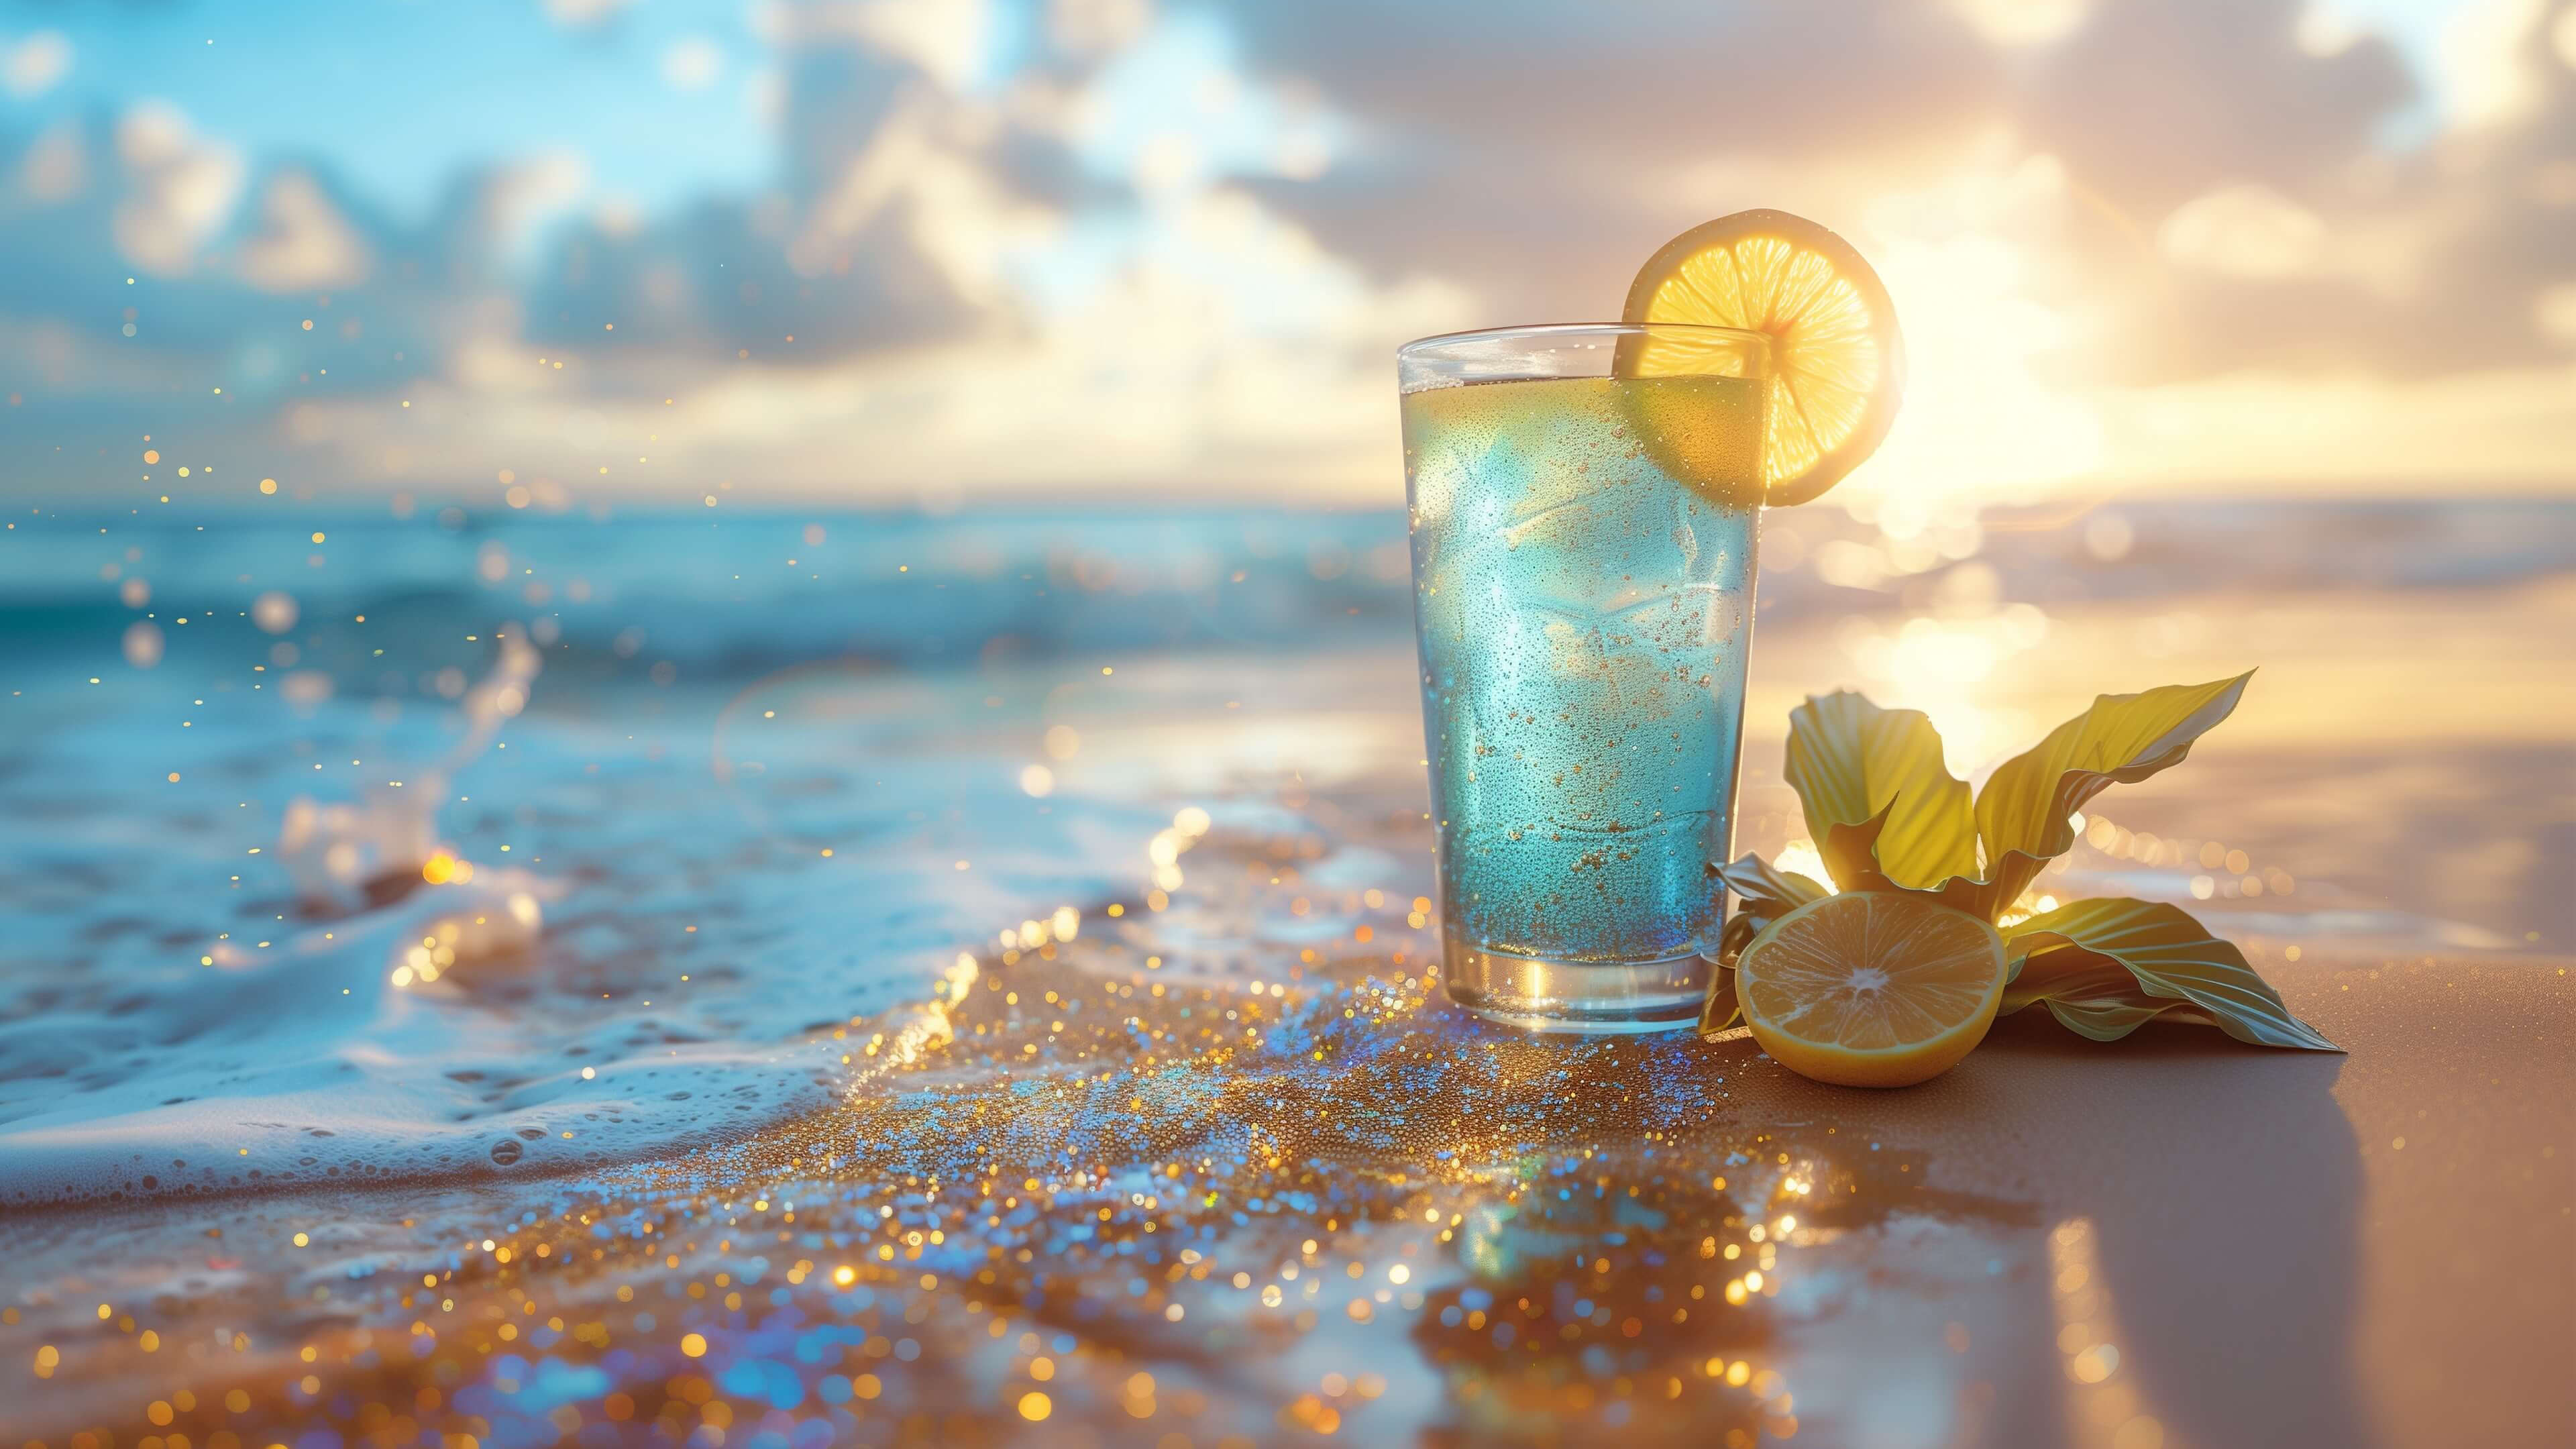 Cold drink on the ocean shore wallpaper 3840x2160